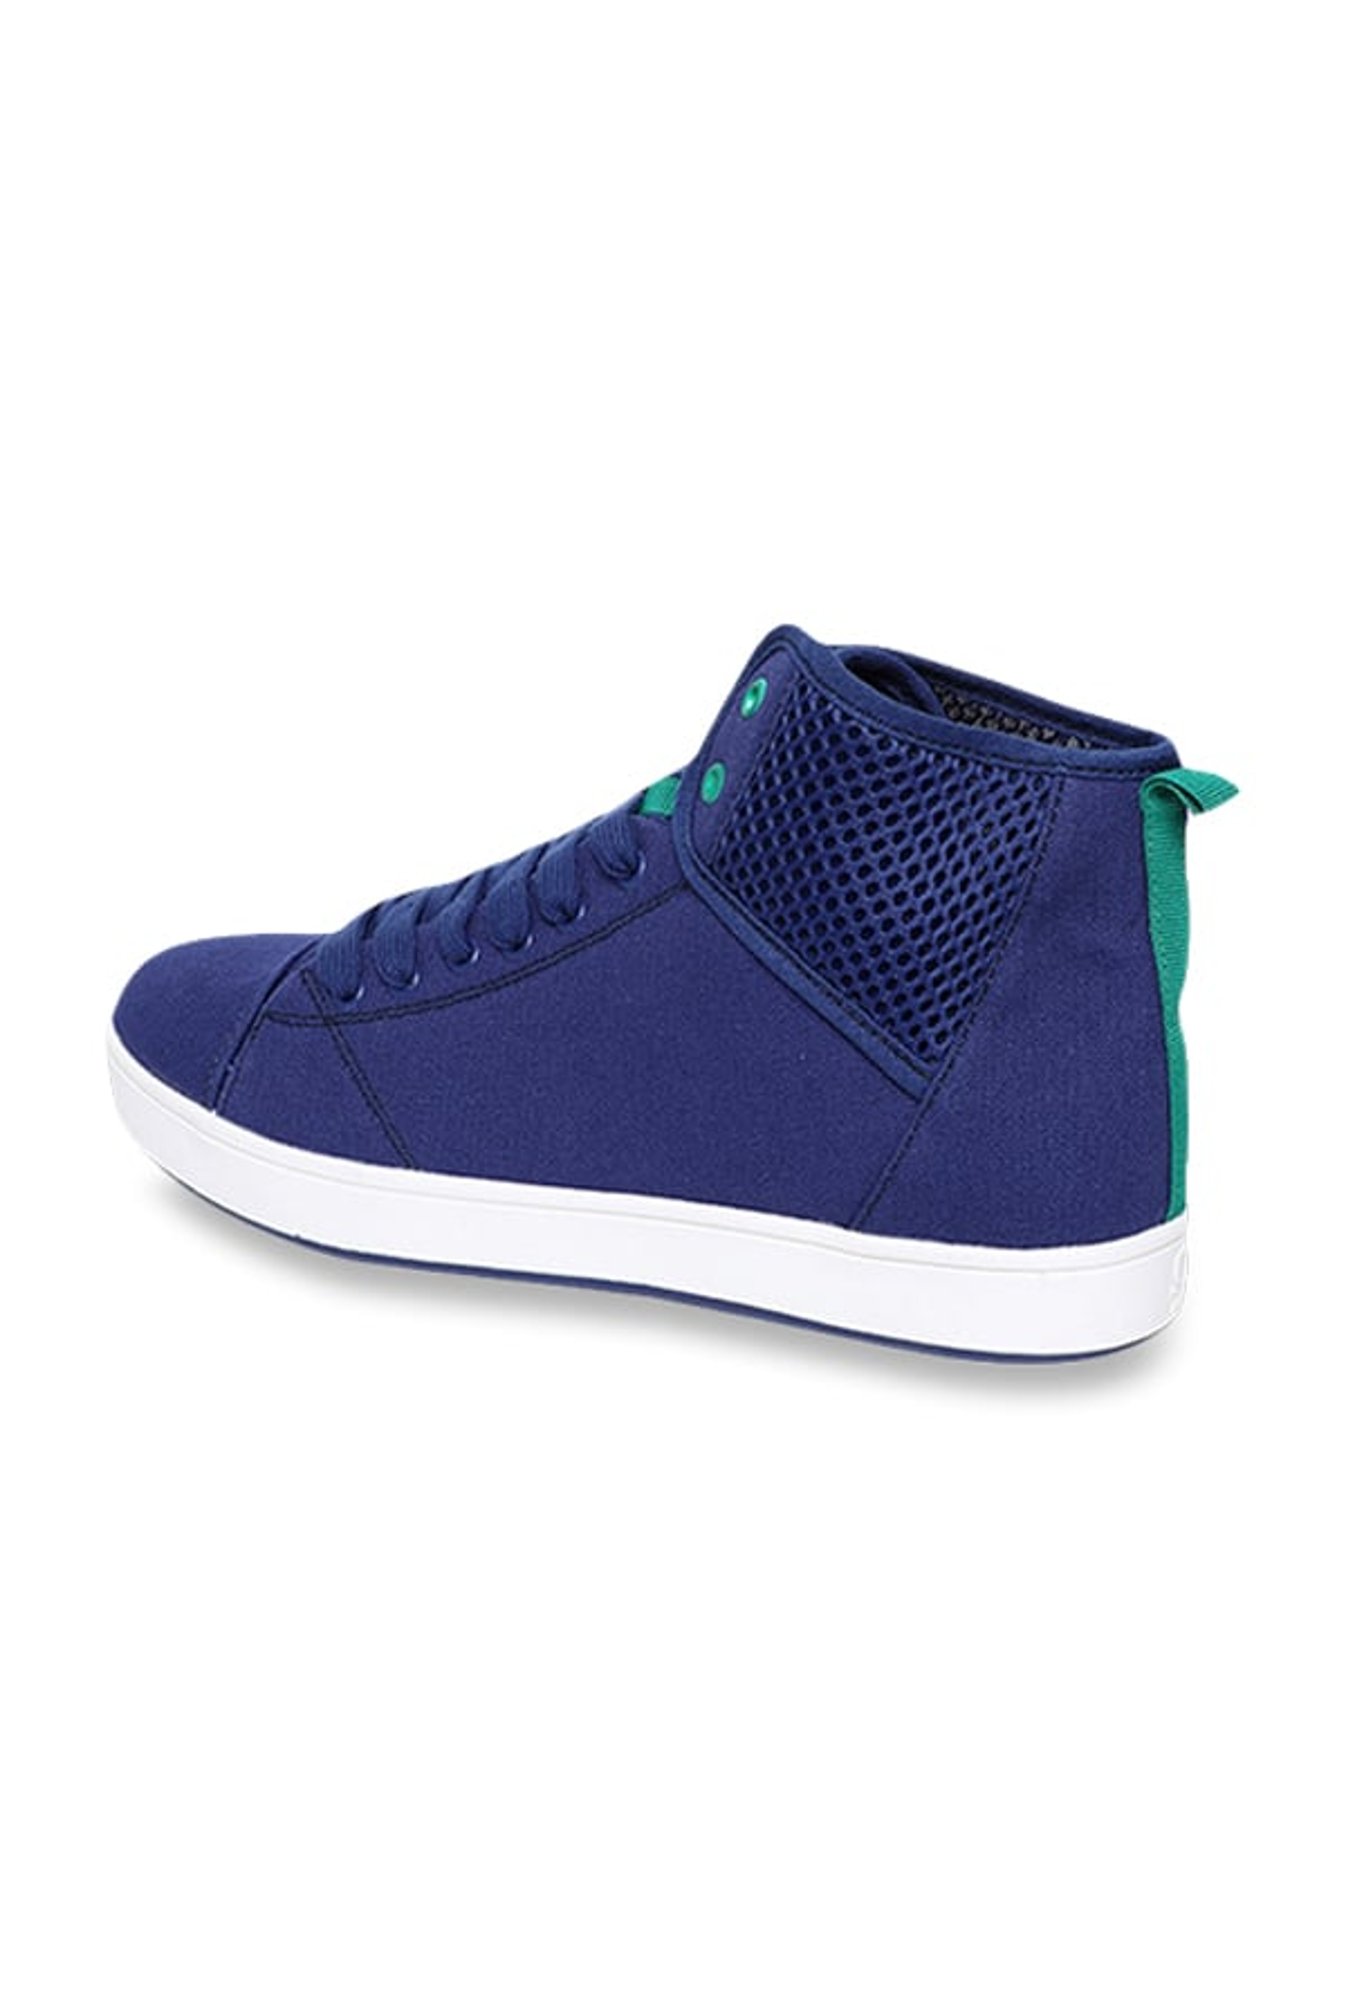 United Colors of Benetton Blue Ankle 